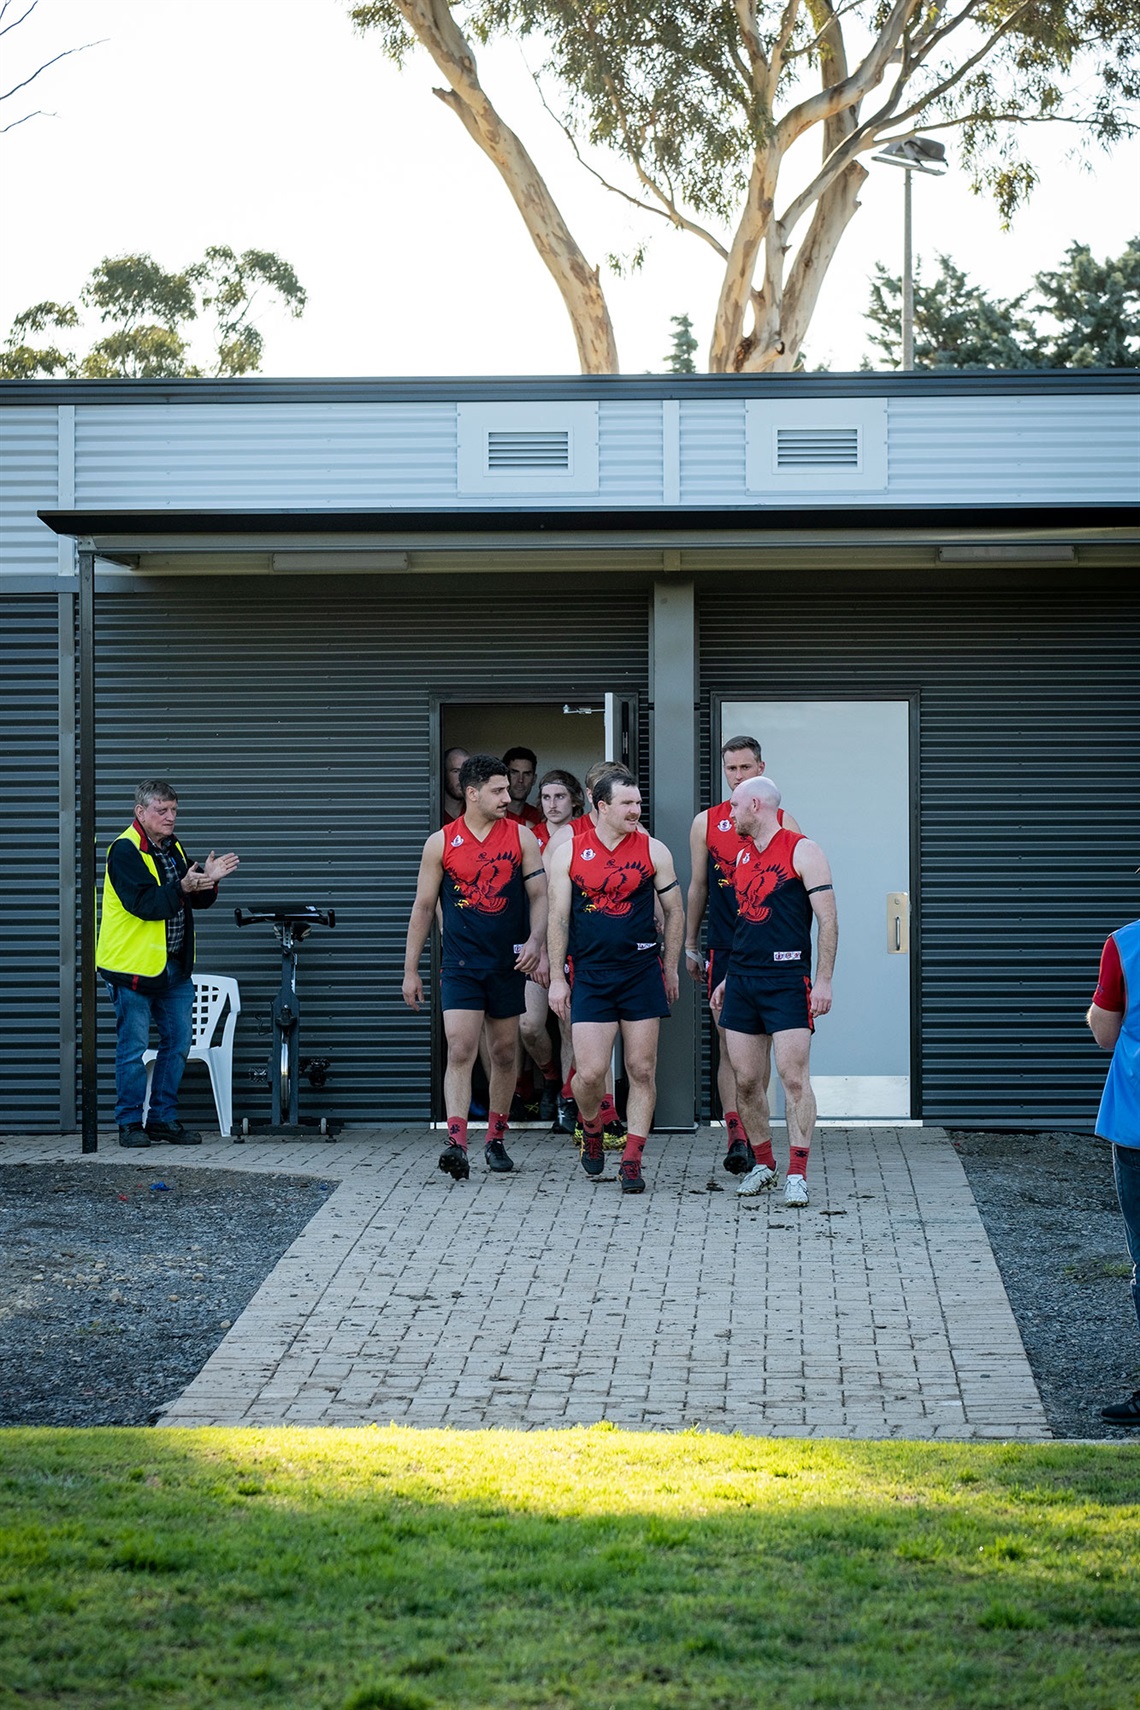 Recreation facilities are being upgraded at the Flagstaff Hill Sports Ground